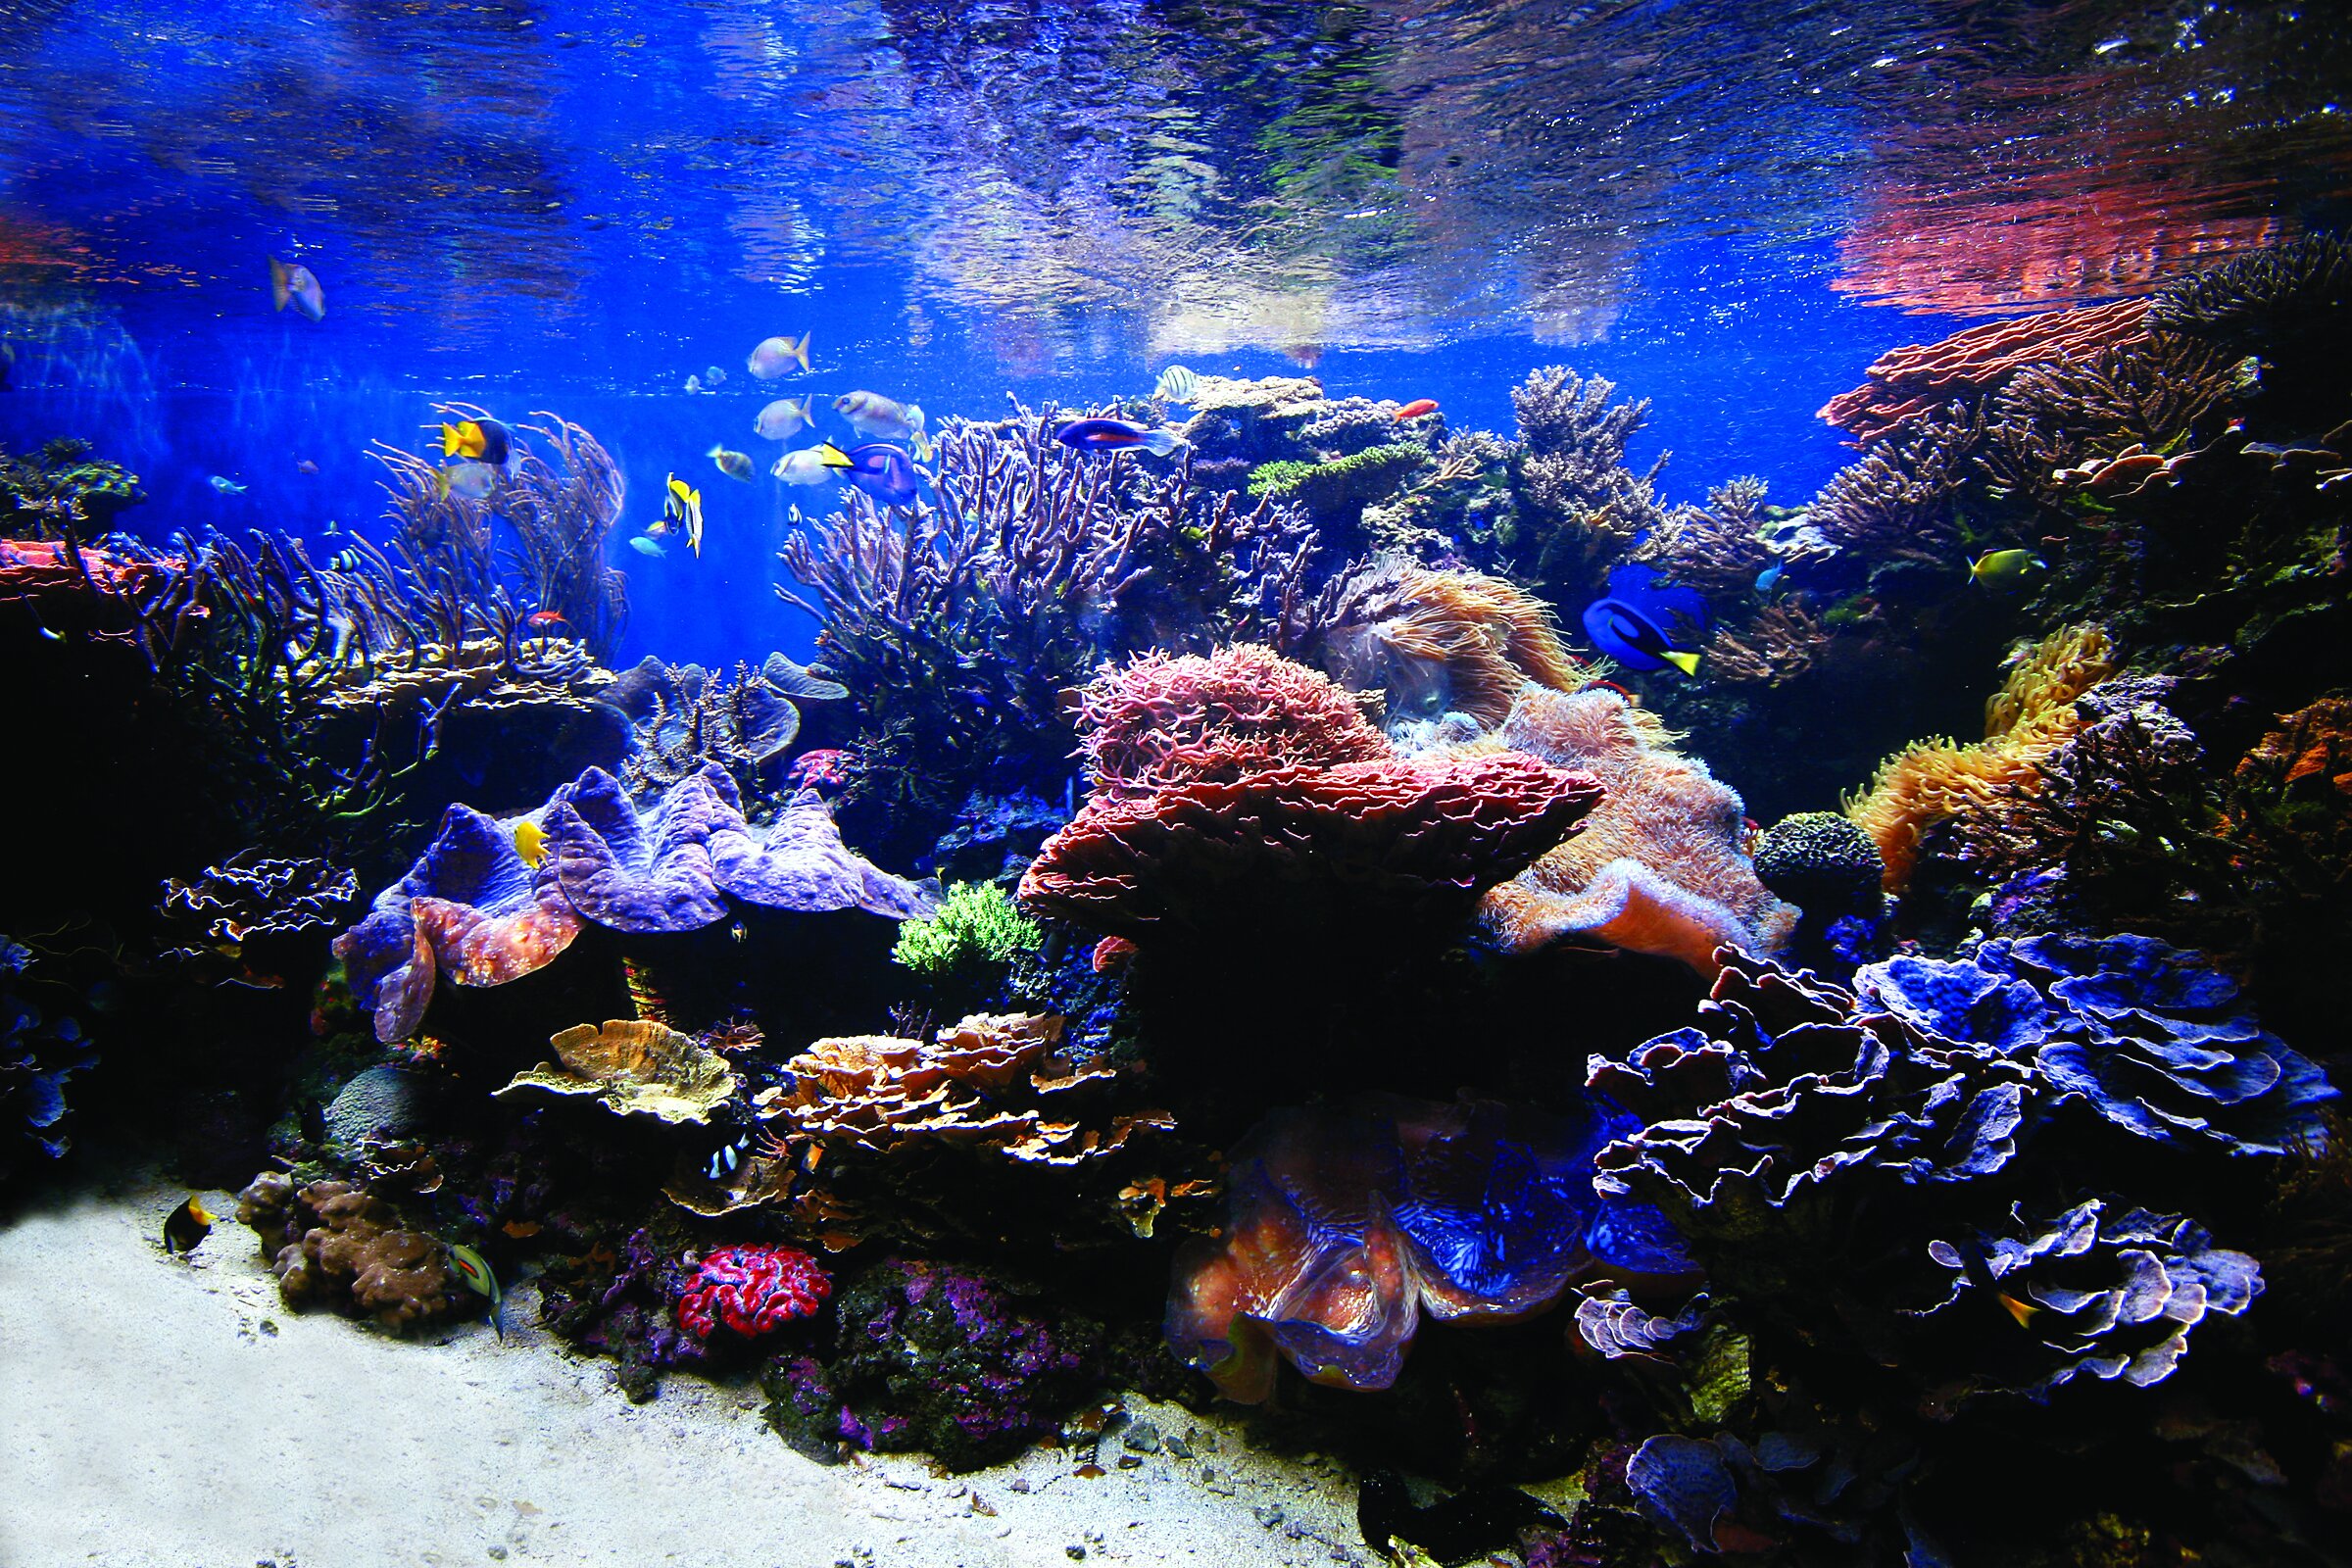  The Waikiki Aquarium is the second-oldest aquarium in the U.S. and boasts more than 500 species of marine life. As a working research center, adults and children alike can learn to appreciate our Pacific marine life ( photos courtesy Waikiki Aquariu